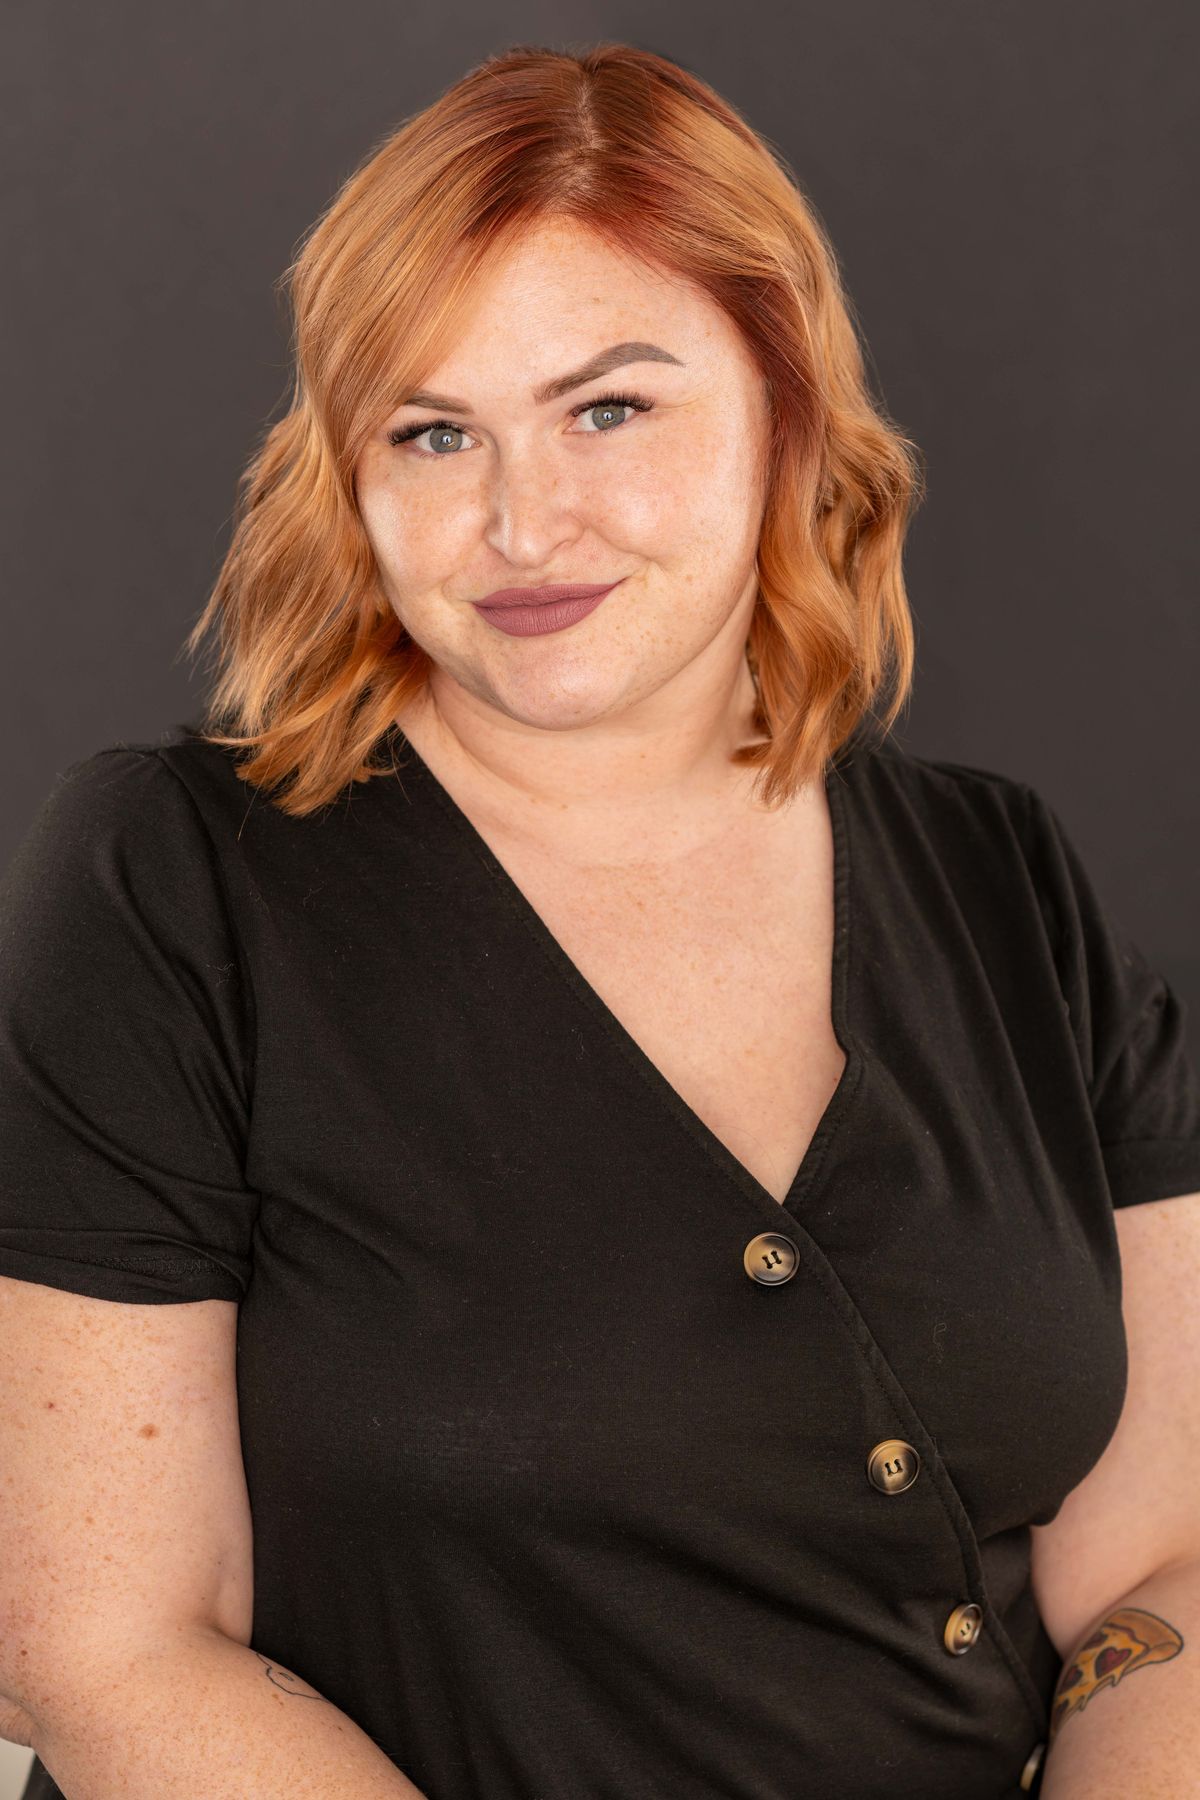 Image of Laura Ott, owner and founder of Ott Counseling